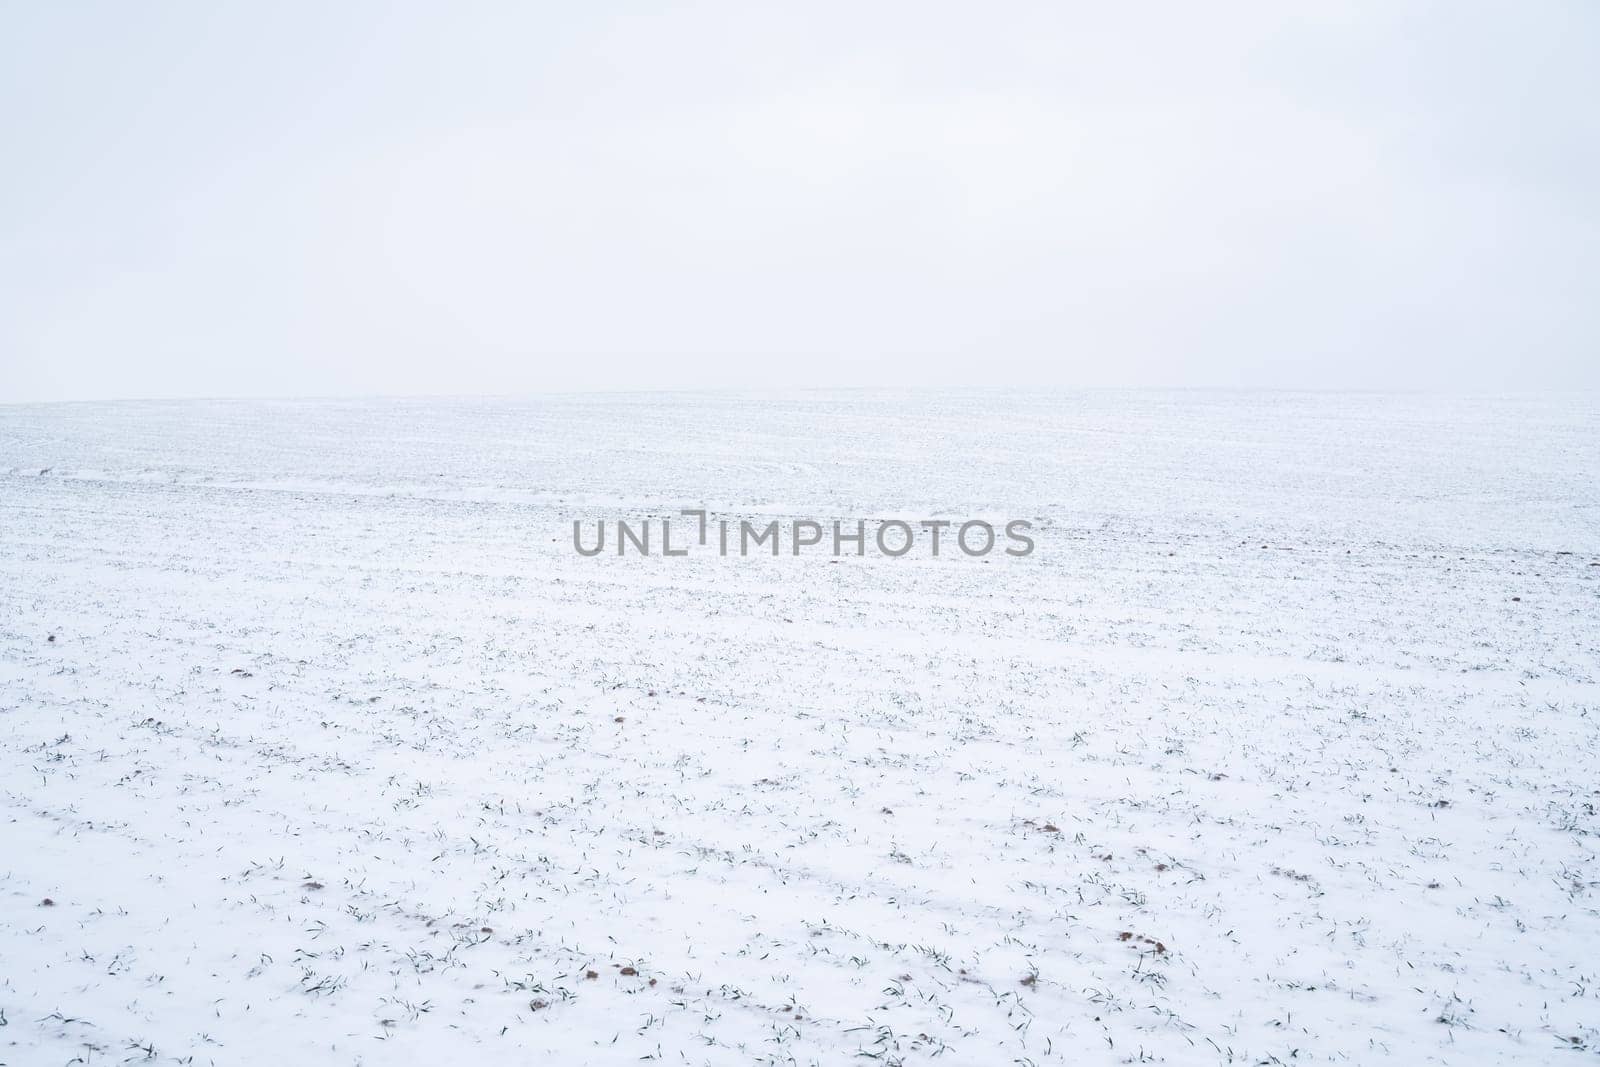 Green young sprouts of wheat, barley, rye under the layer of fresh snow in a spring. by vovsht